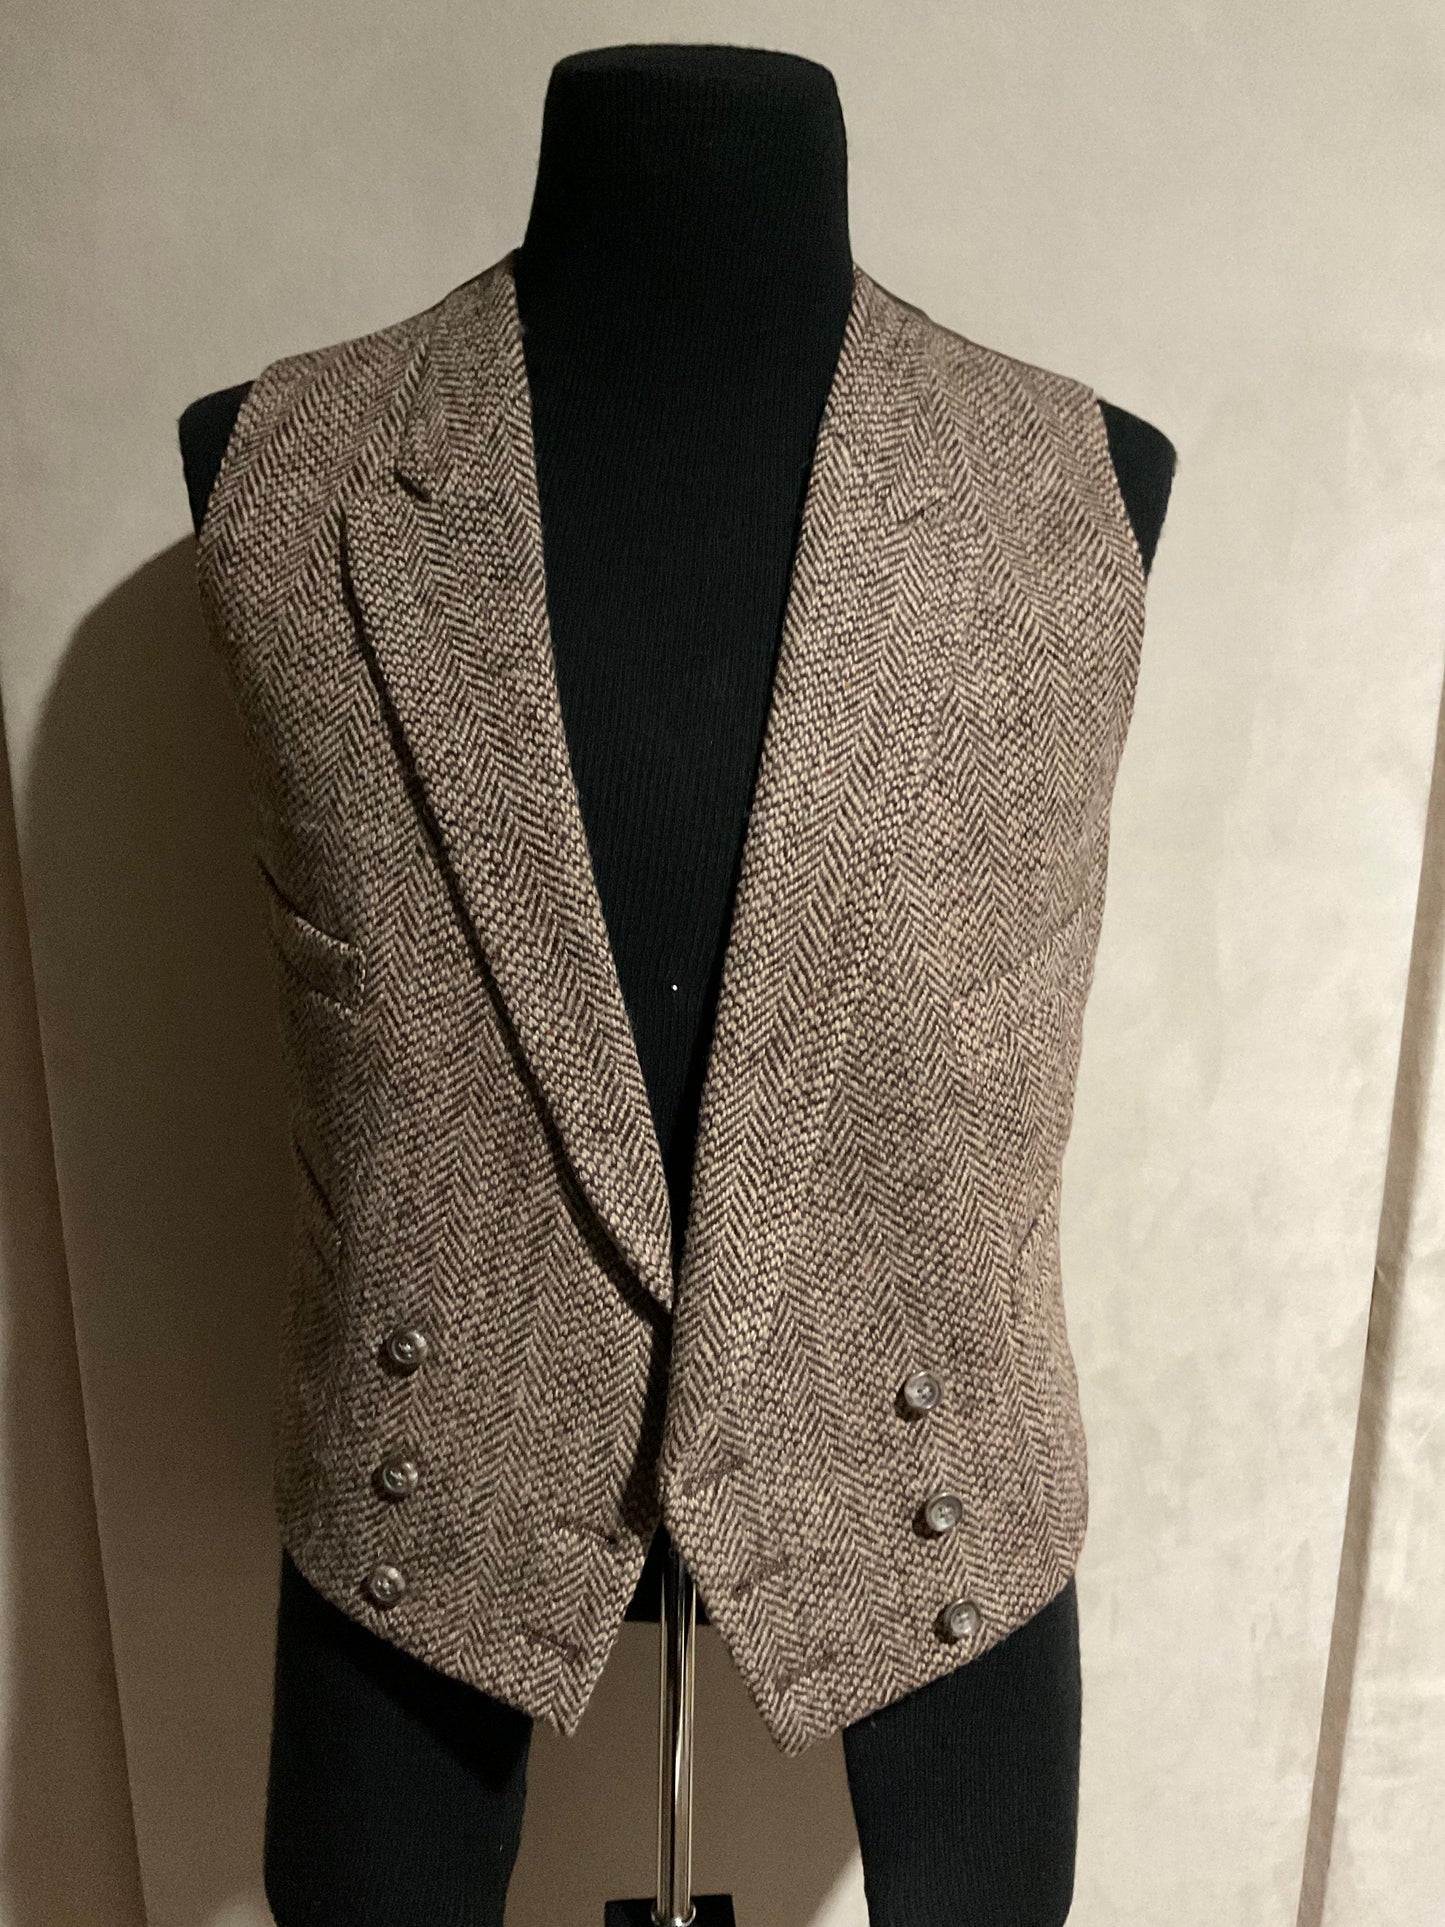 R P VEST / DOUBLE BREASTED / BROWN TWEED / SMALL / FABRIC MADE IN ENGLAND